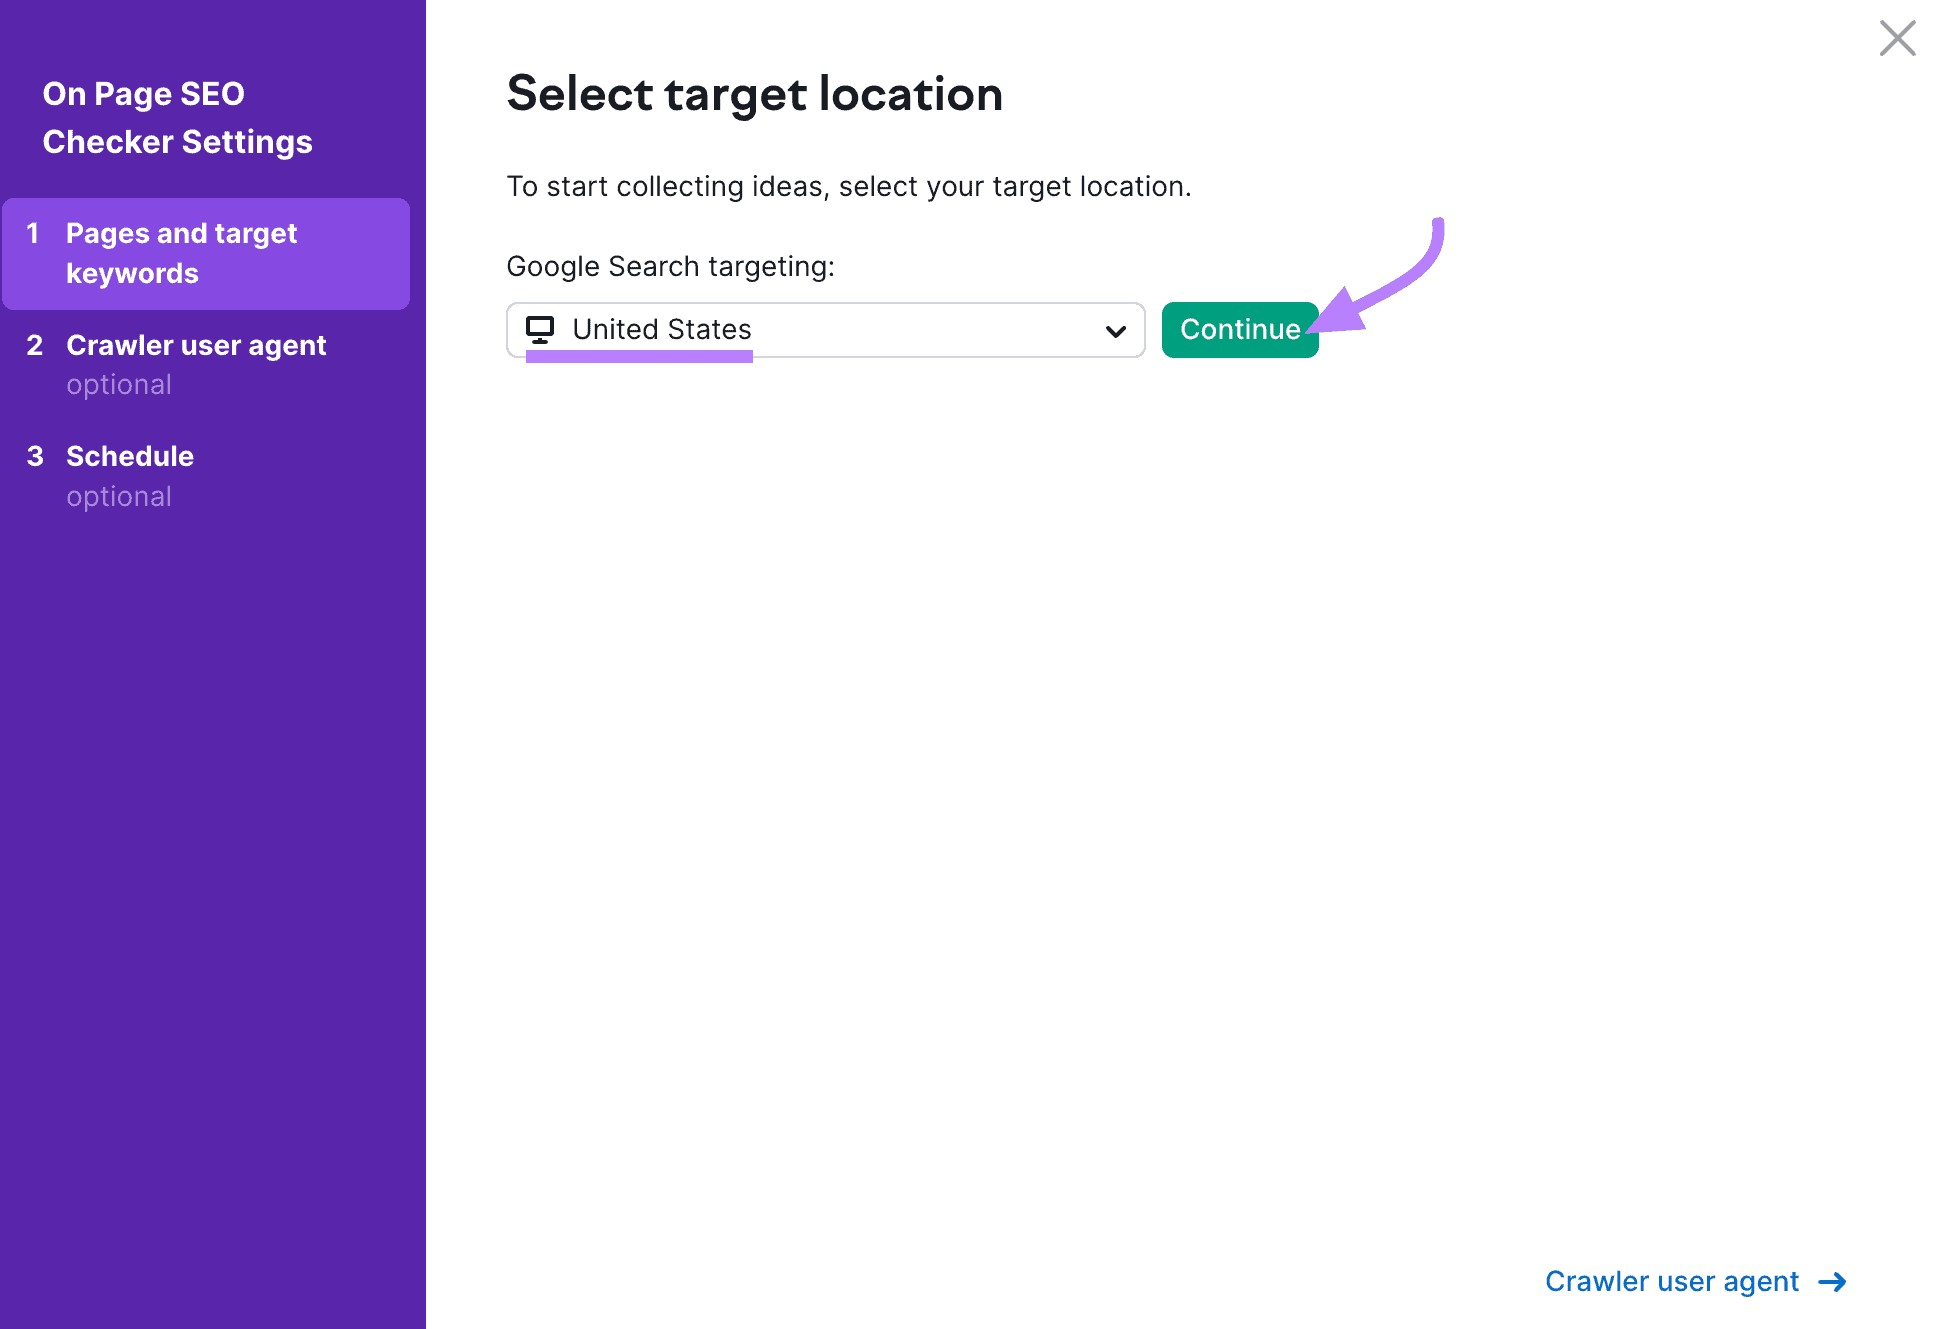 "Select target location" window in On Page SEO Checker Settings